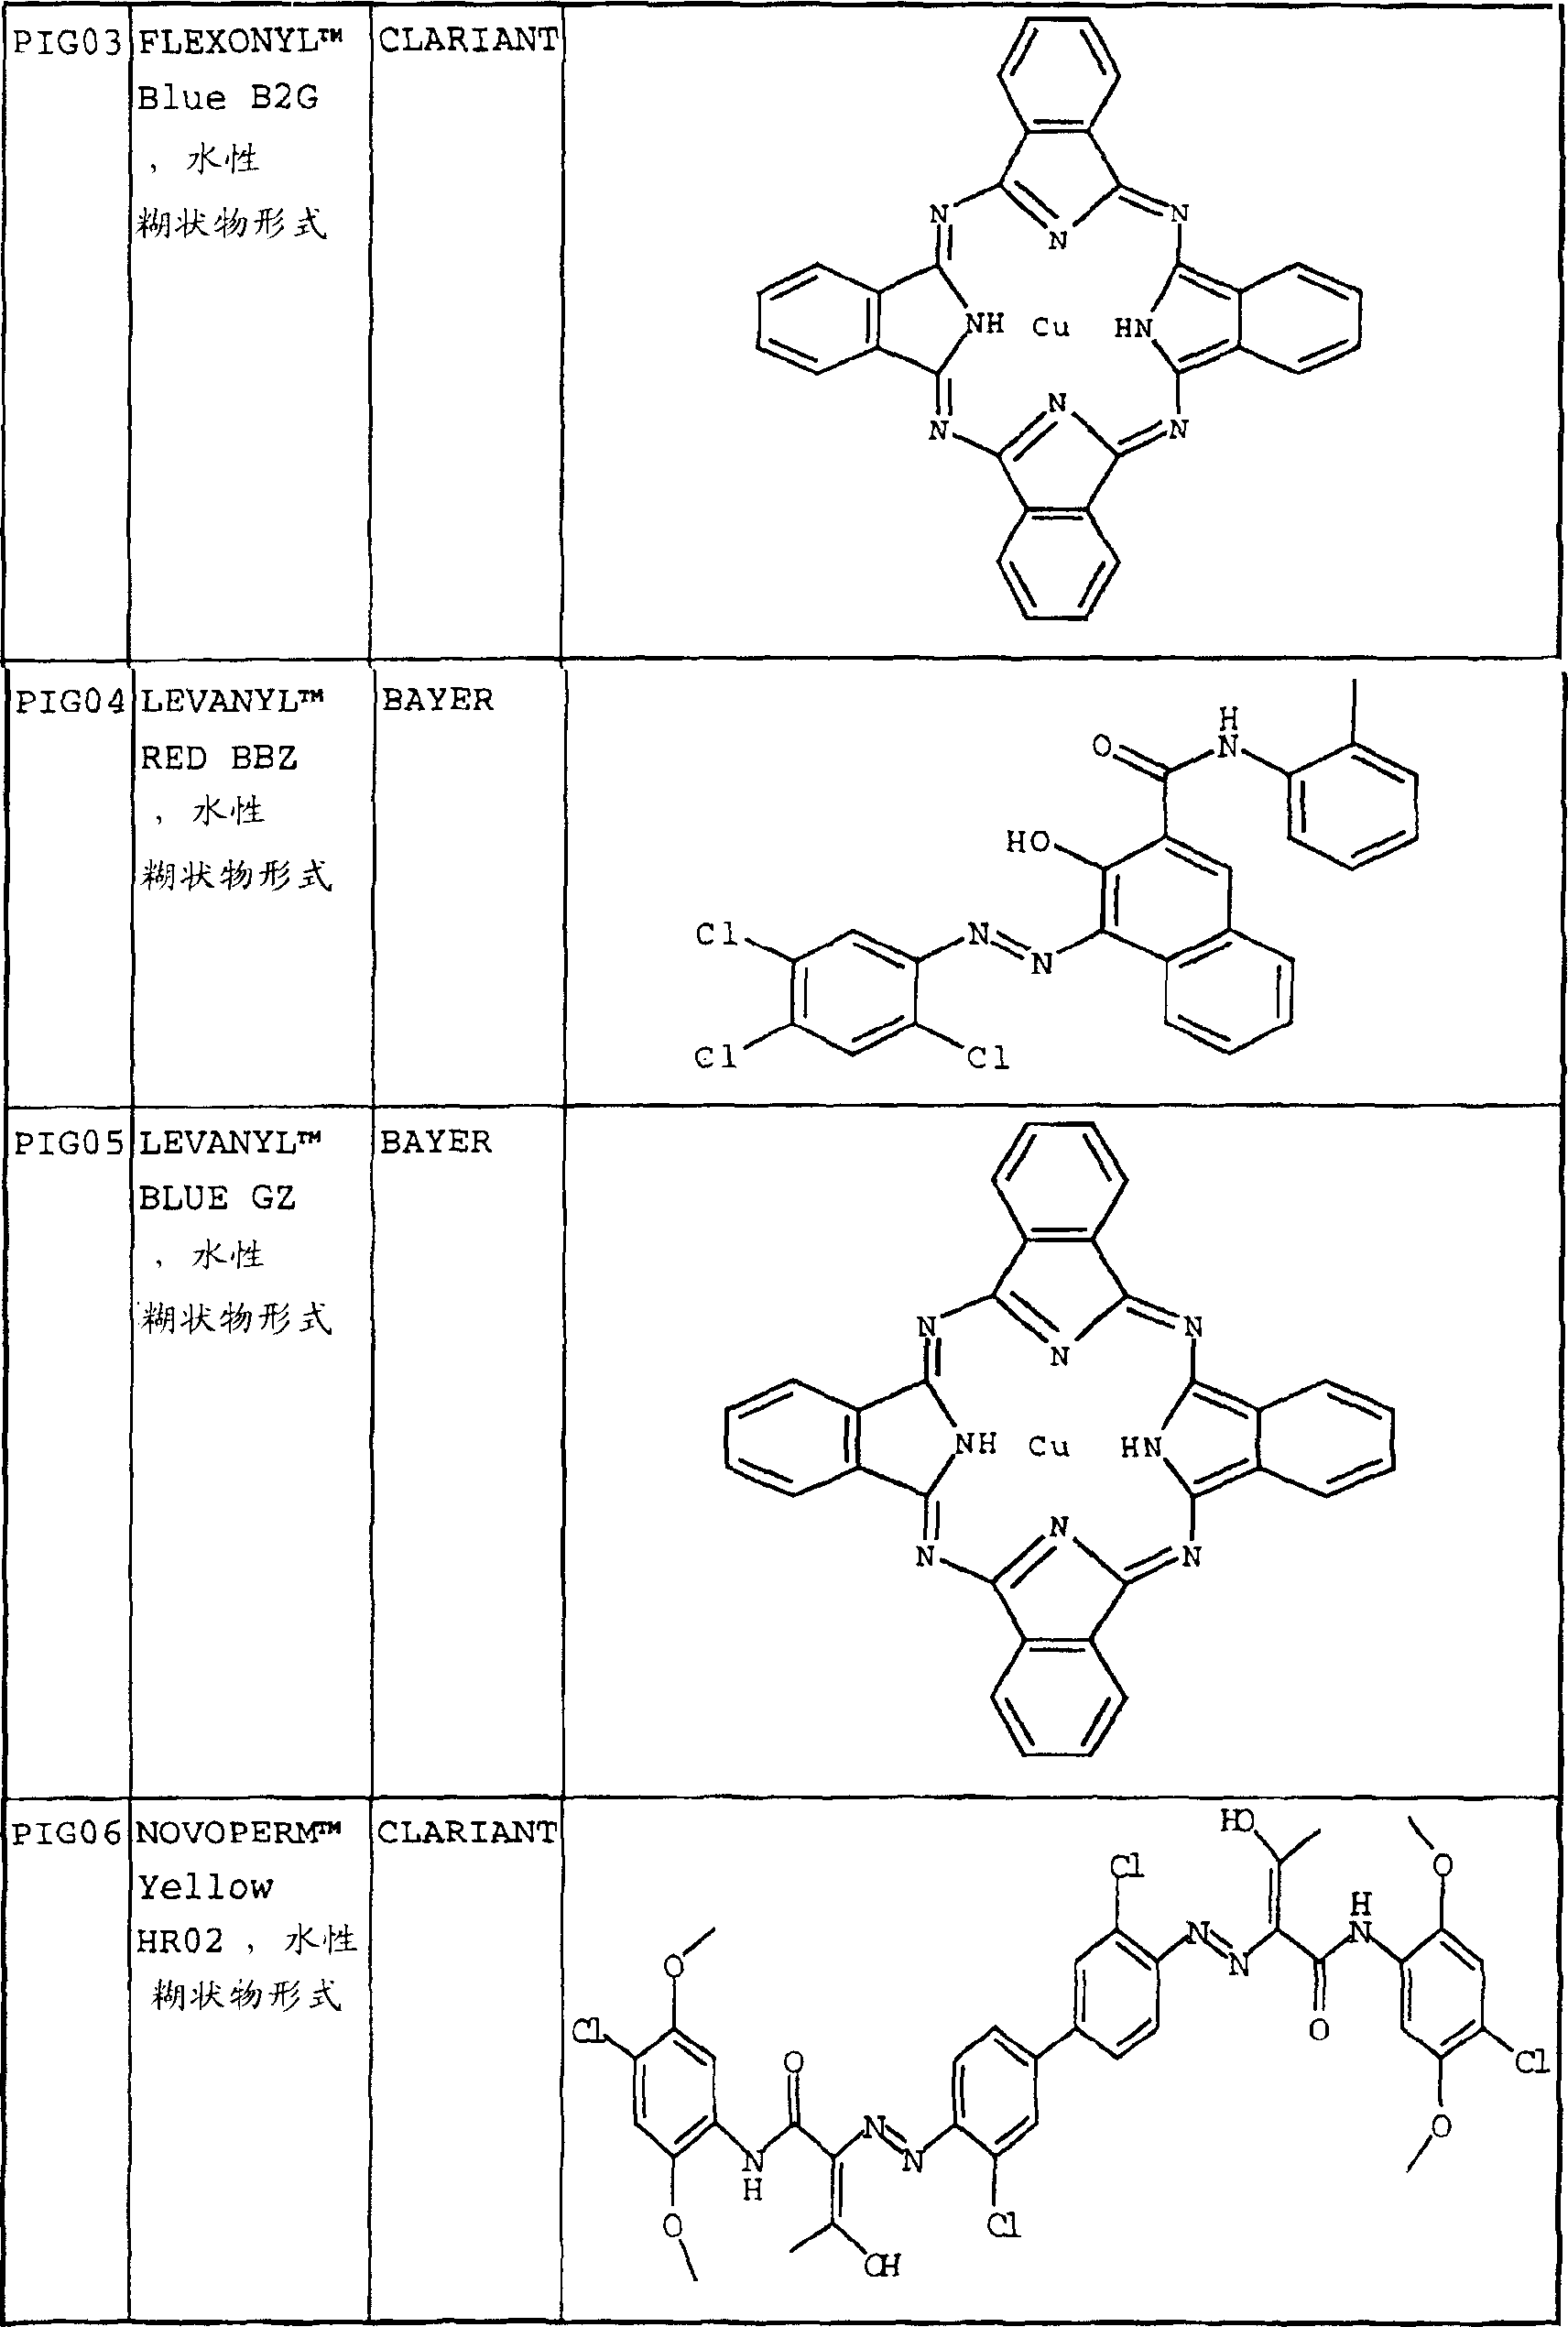 Flexographic ink containing polymer or copolymer of 3,4-dialkoxythiophene